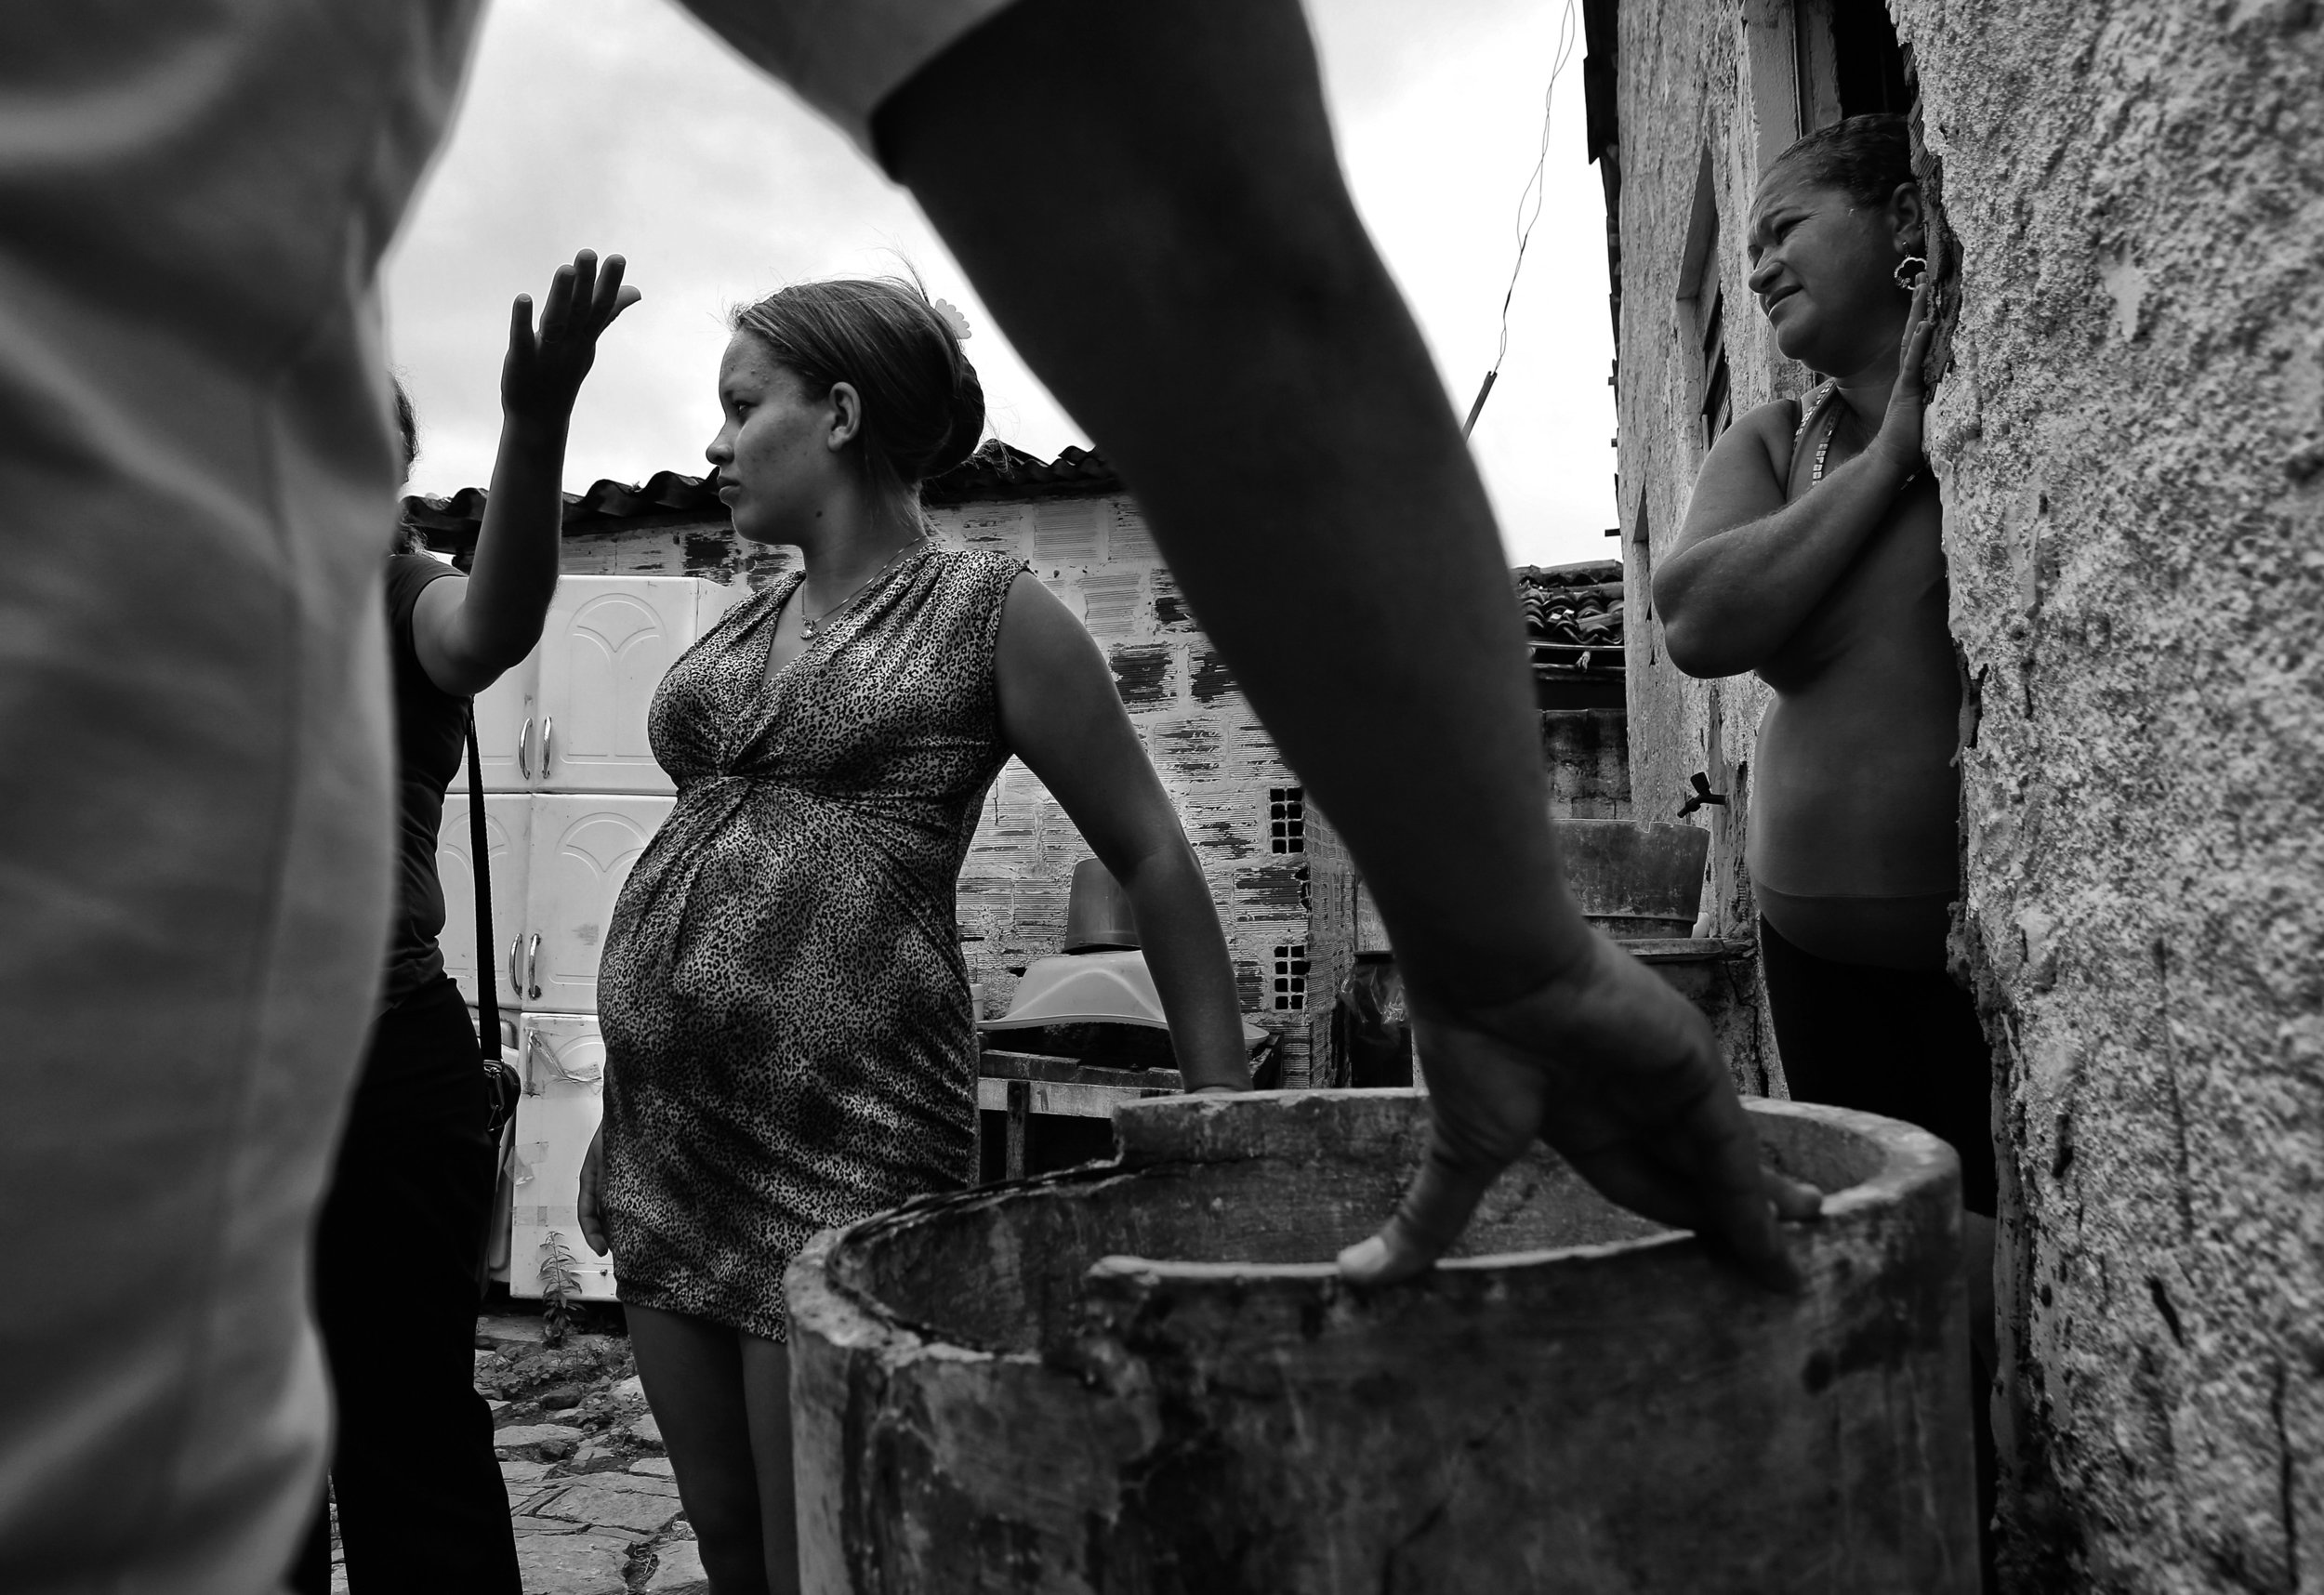  Behind their home, Carla de Sousa, who is pregnant, left, and her mother, Maria de Sousa, listen as mosquito control agents give tips on how to prevent mosquitoes around their home. An agent drew a sample of water being stored in a broken washing ma